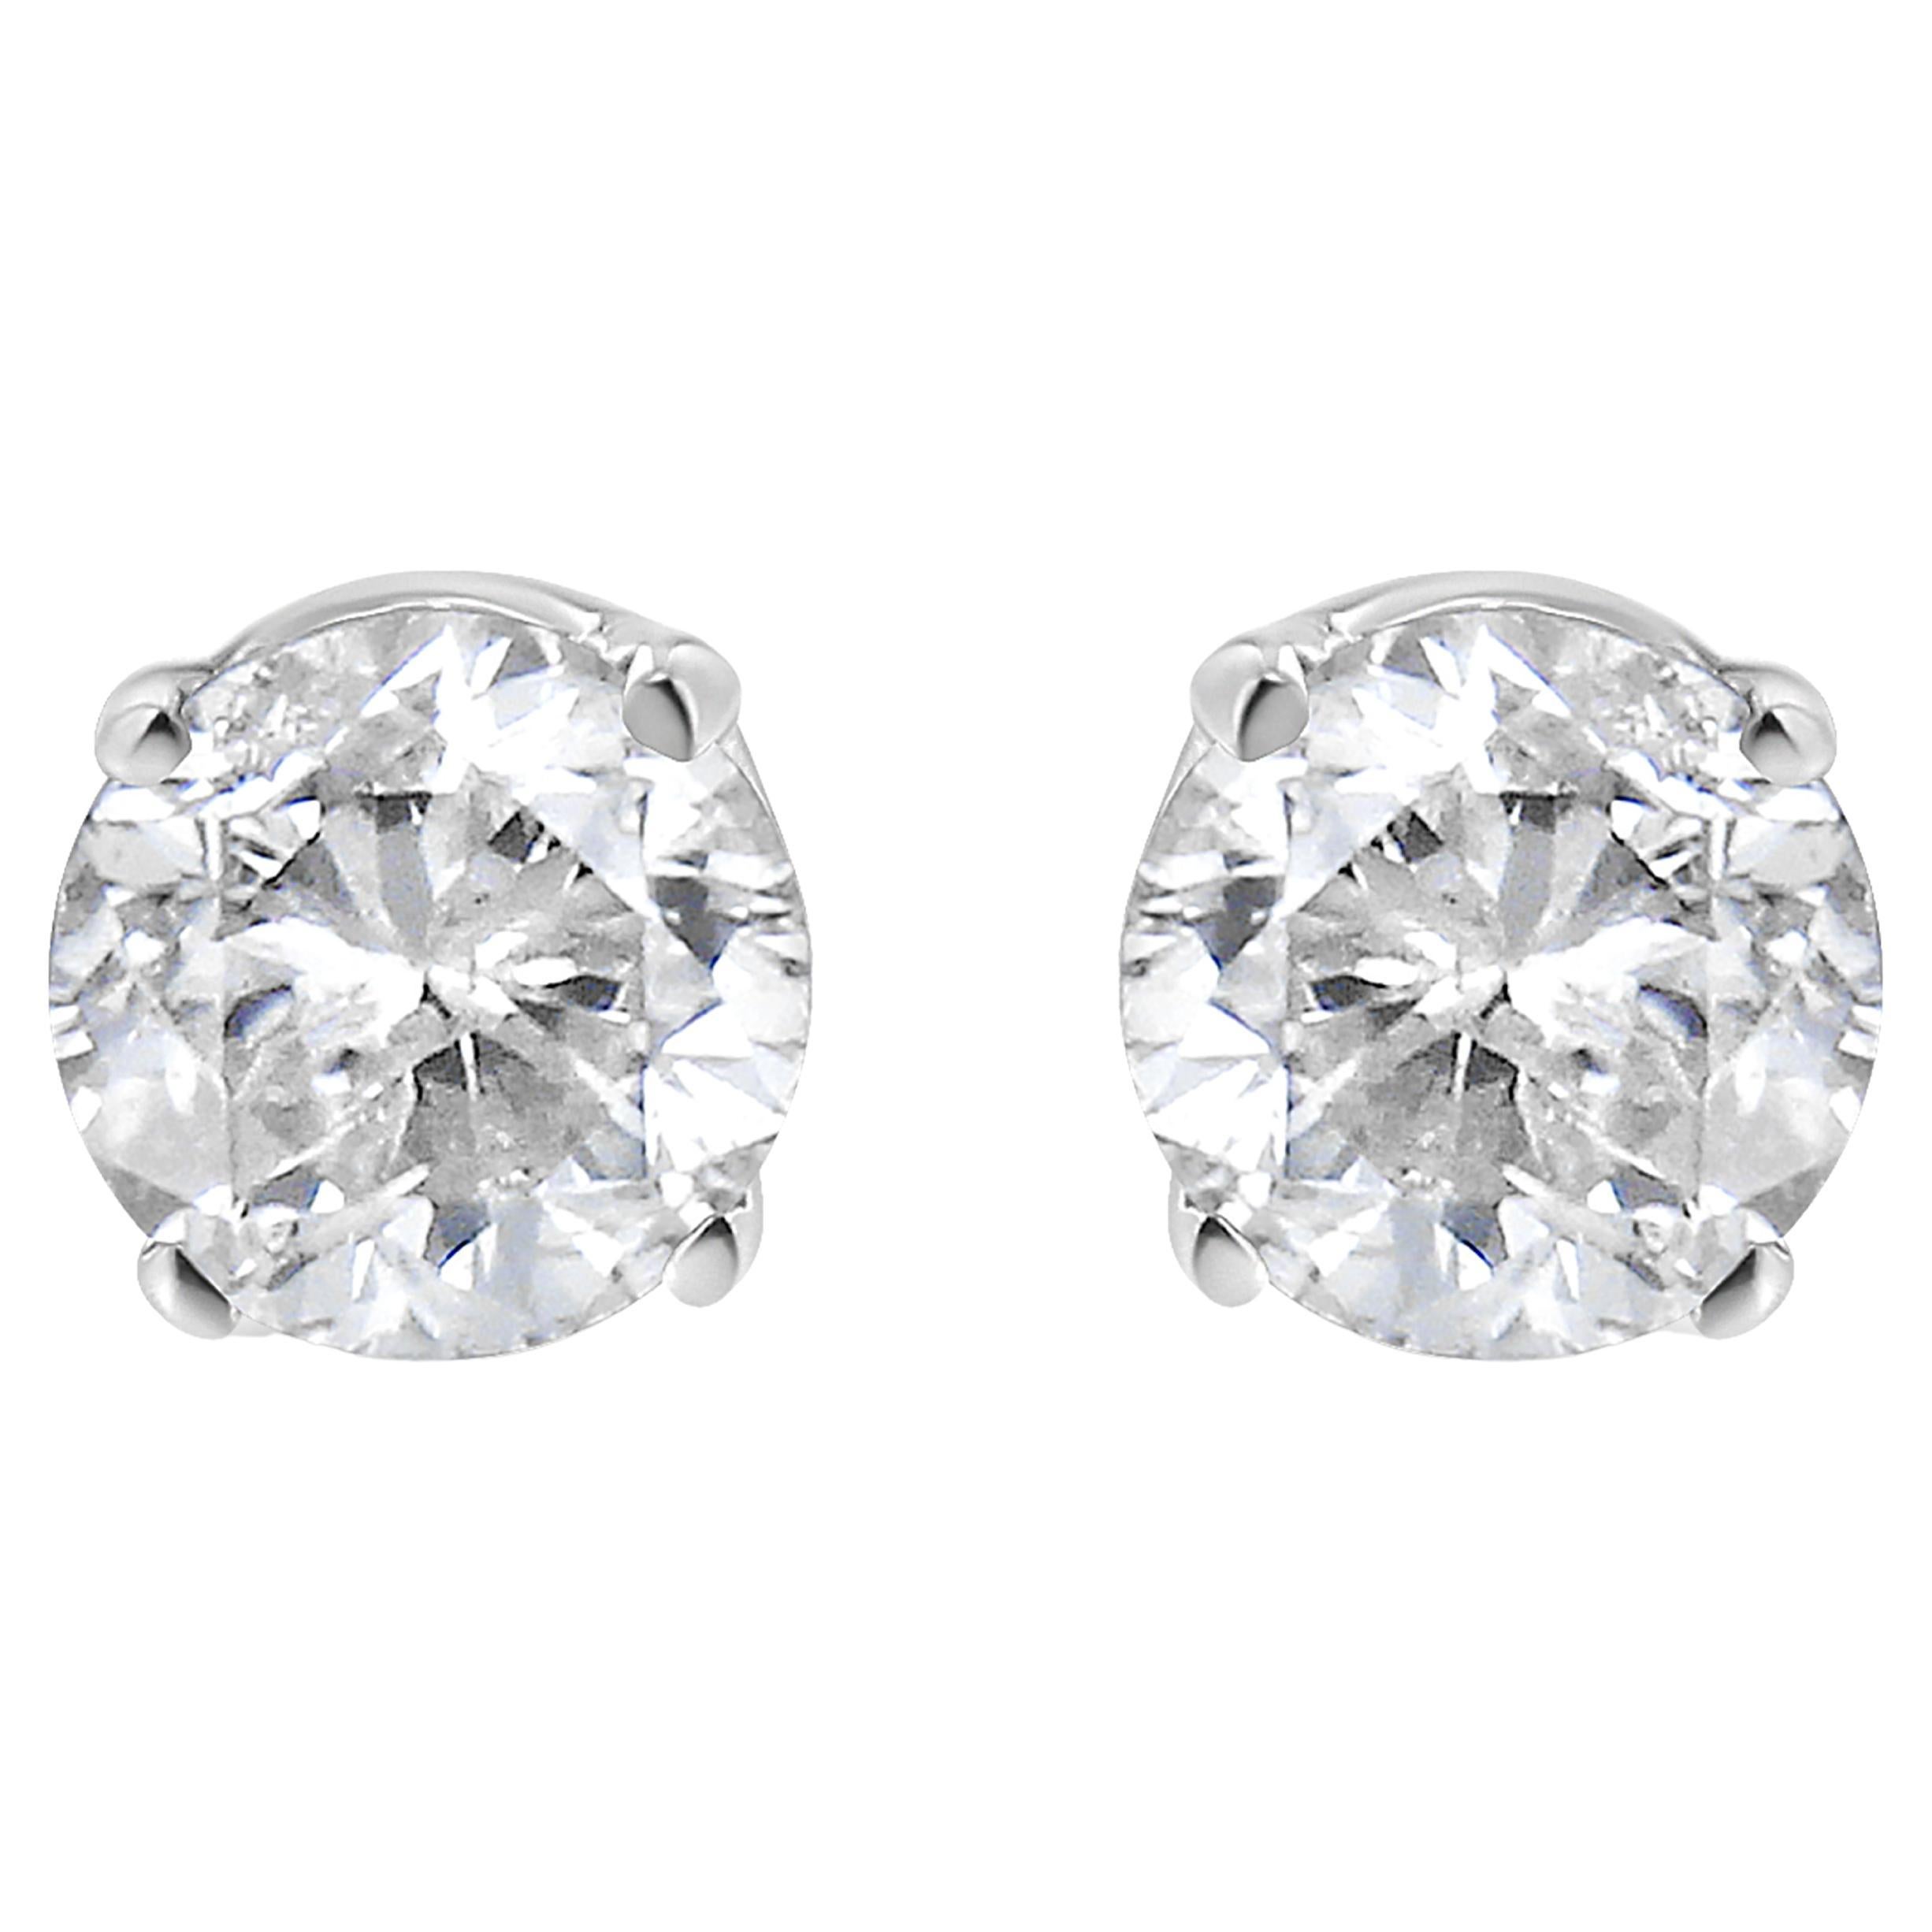 14K White Gold Round Cut 1/2 Carat Diamond Solitaire Stud Earrings